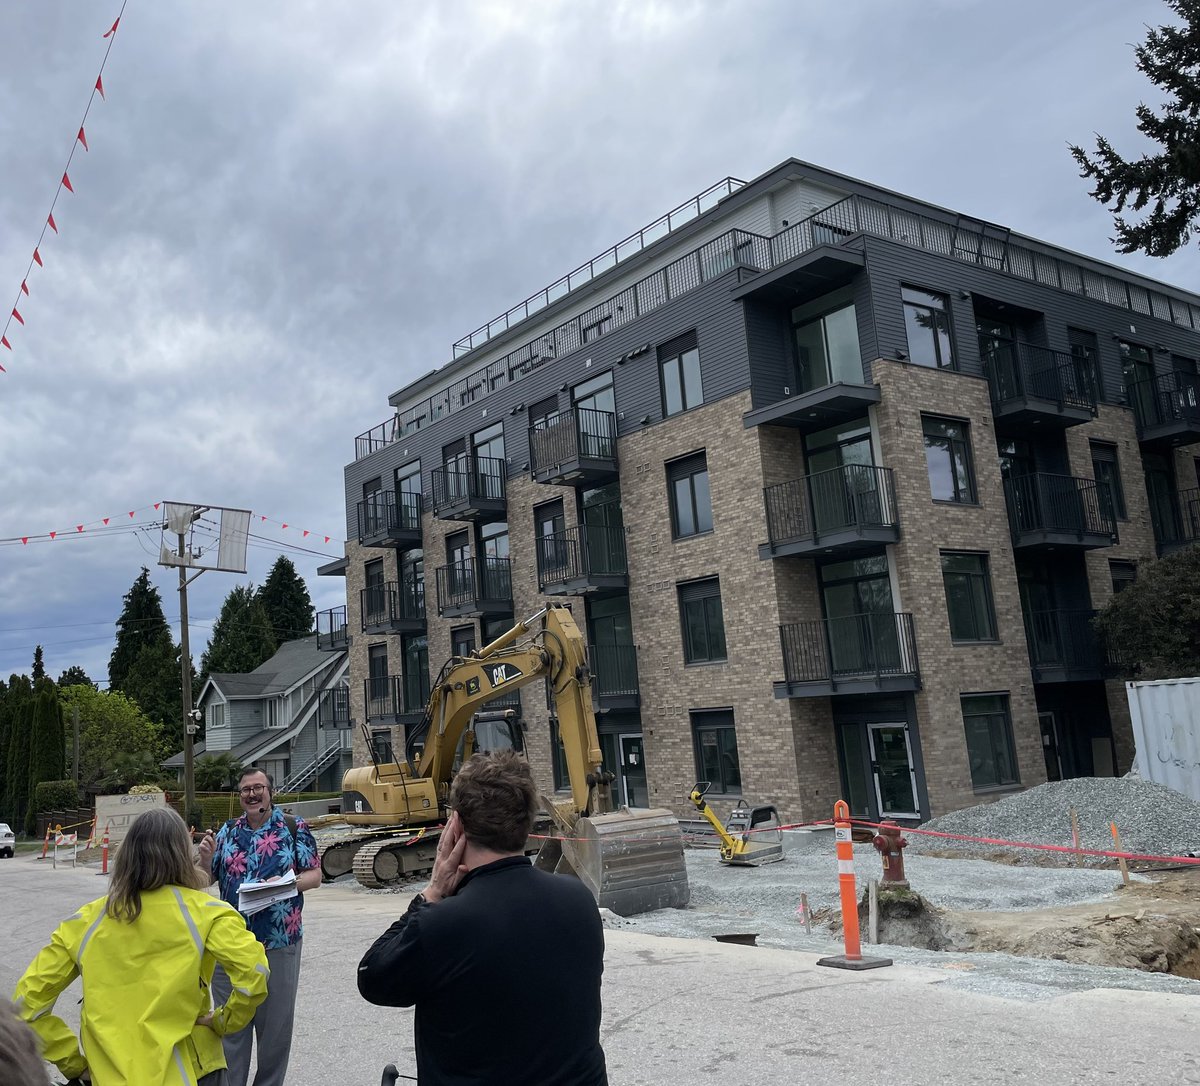 A 5-storey apartment on the 'wrong' side of the street, 'dropping the ghetto in Kitsilano,' with 20% below market rents. Approved 4.5 years ago, it's almost finished. Part of the now defunct Moderate Income Rental Housing pilot program. 2nd & Larch.